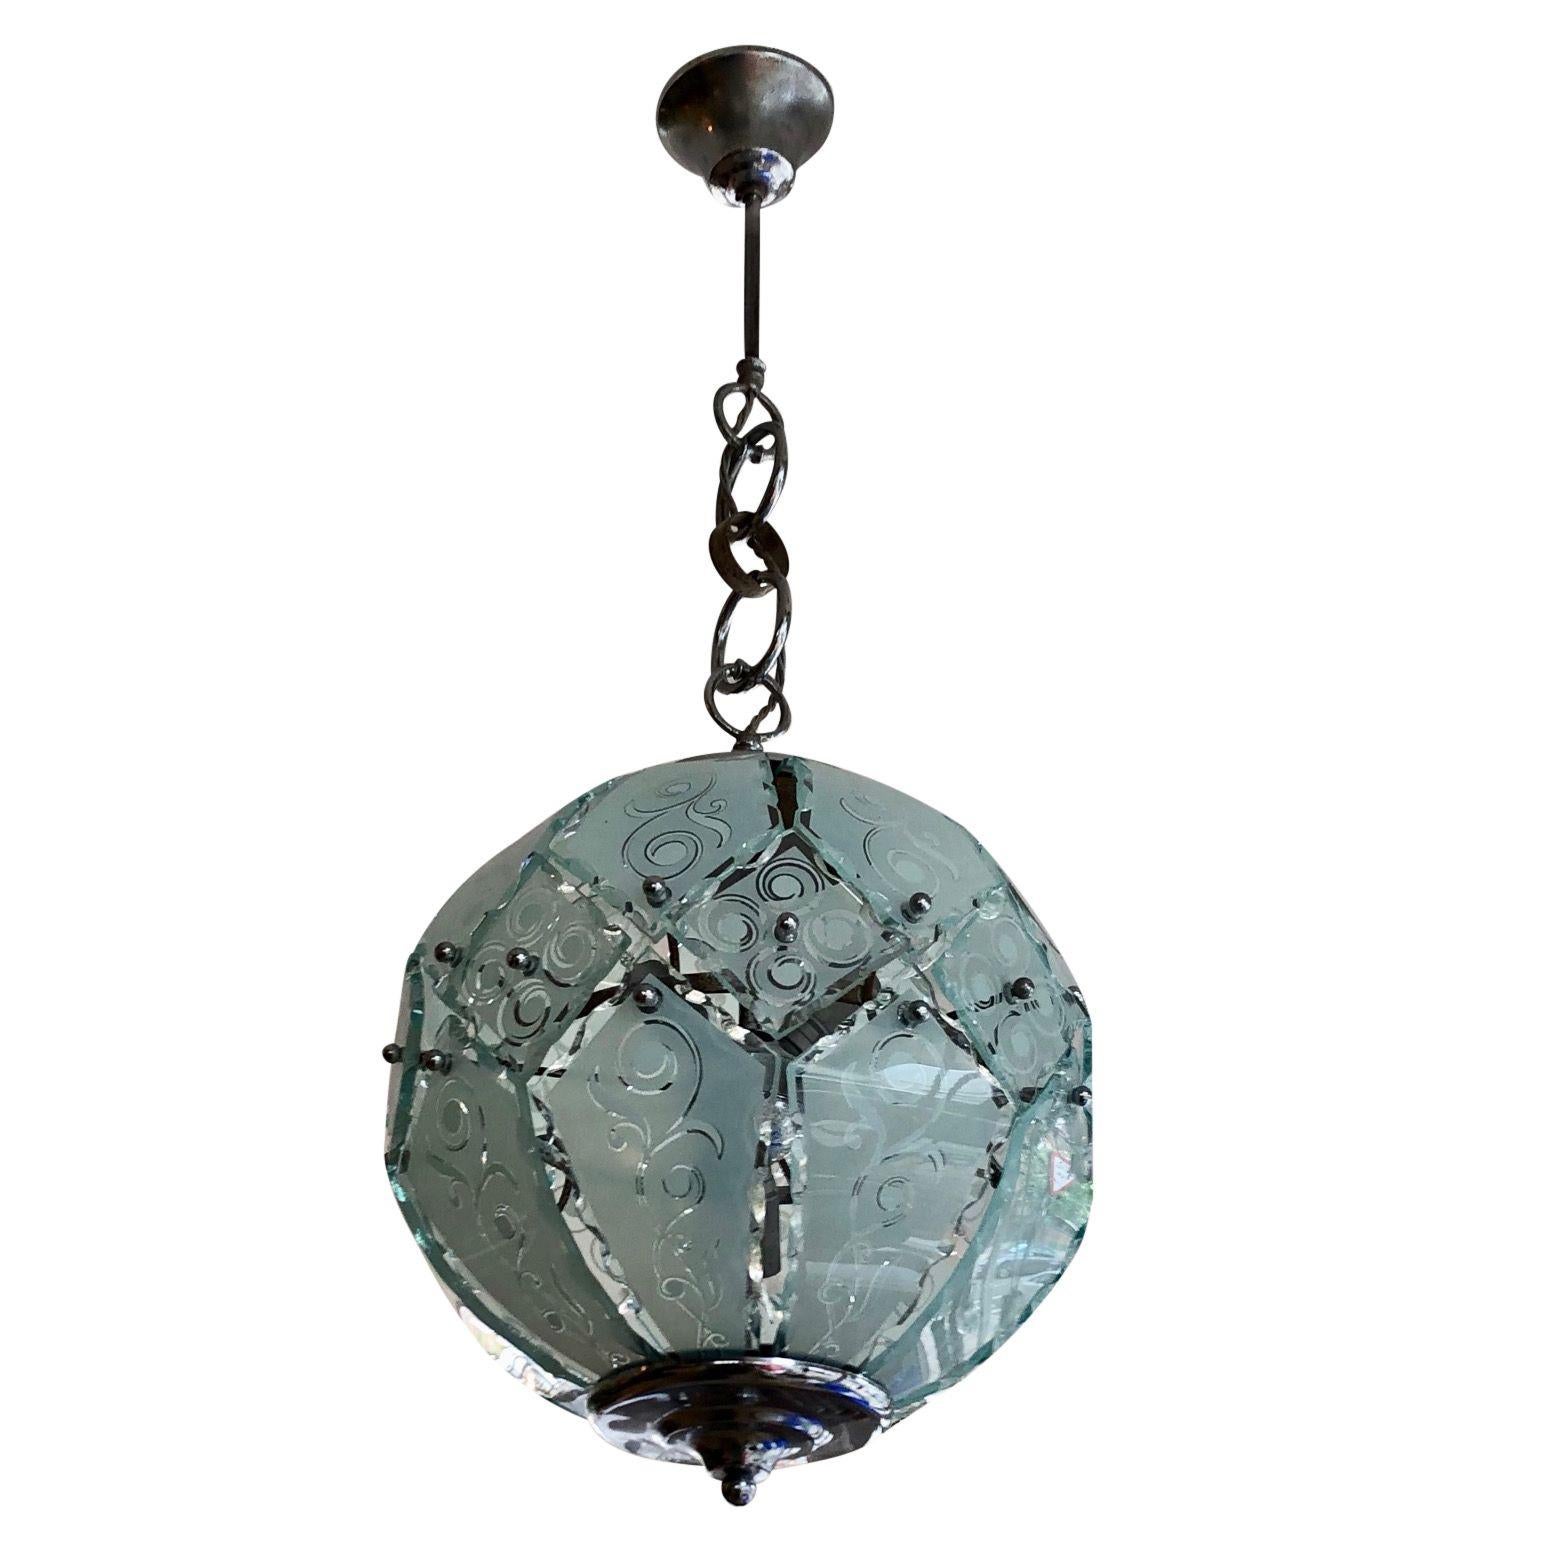 Incised and painted pastel aqua glass and chromed metal pendant ceiling globe lights, Italy, 1950s. Please note that only one is still available.
  